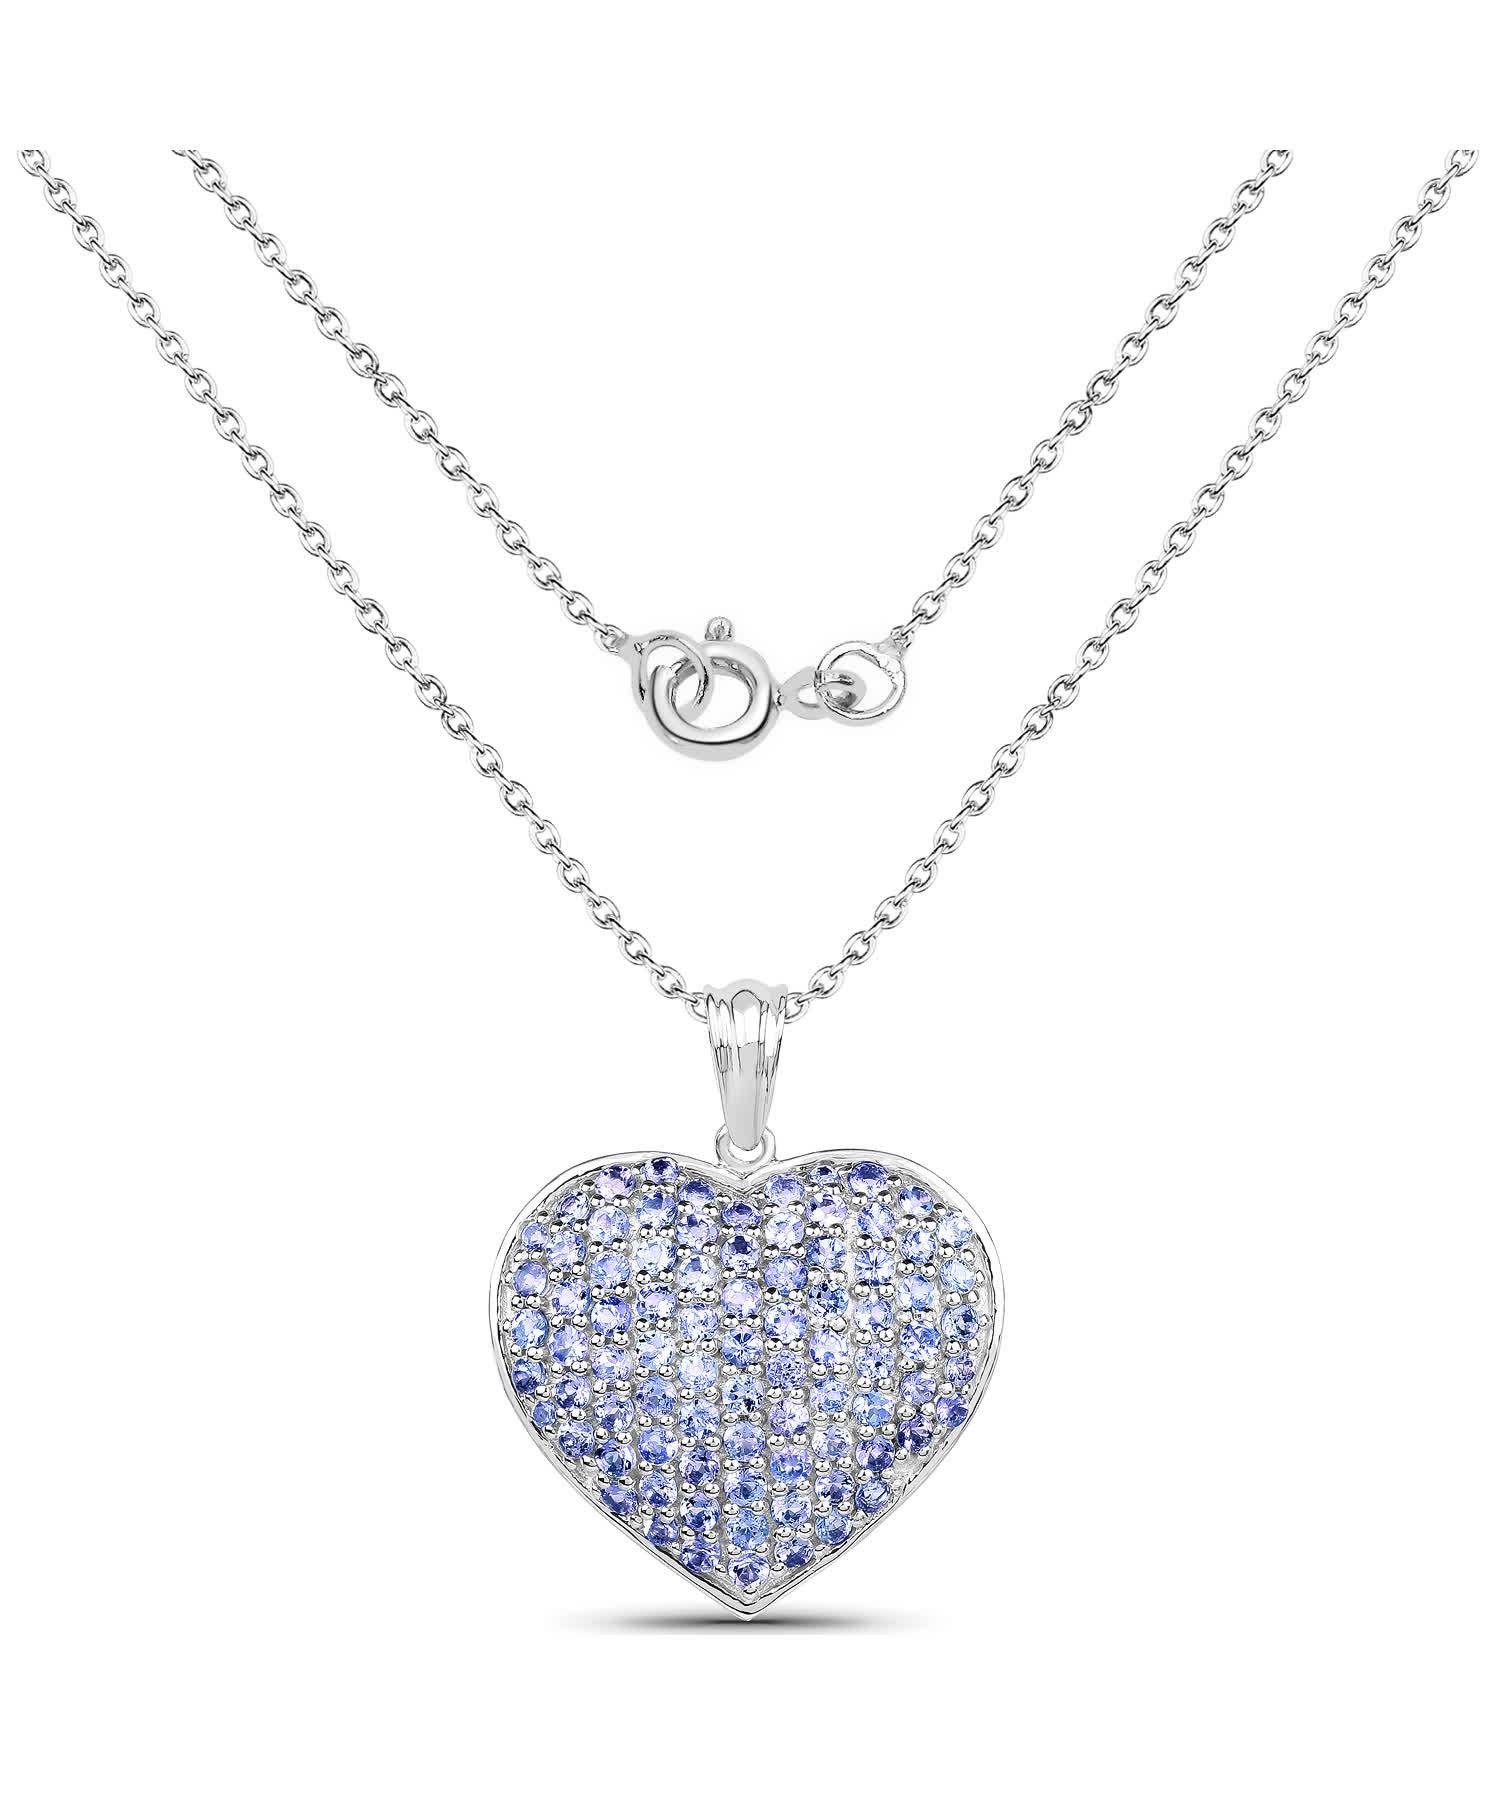 2.43ctw Natural Lavender Tanzanite Rhodium Plated 925 Sterling Silver Heart Pendant With Chain View 2